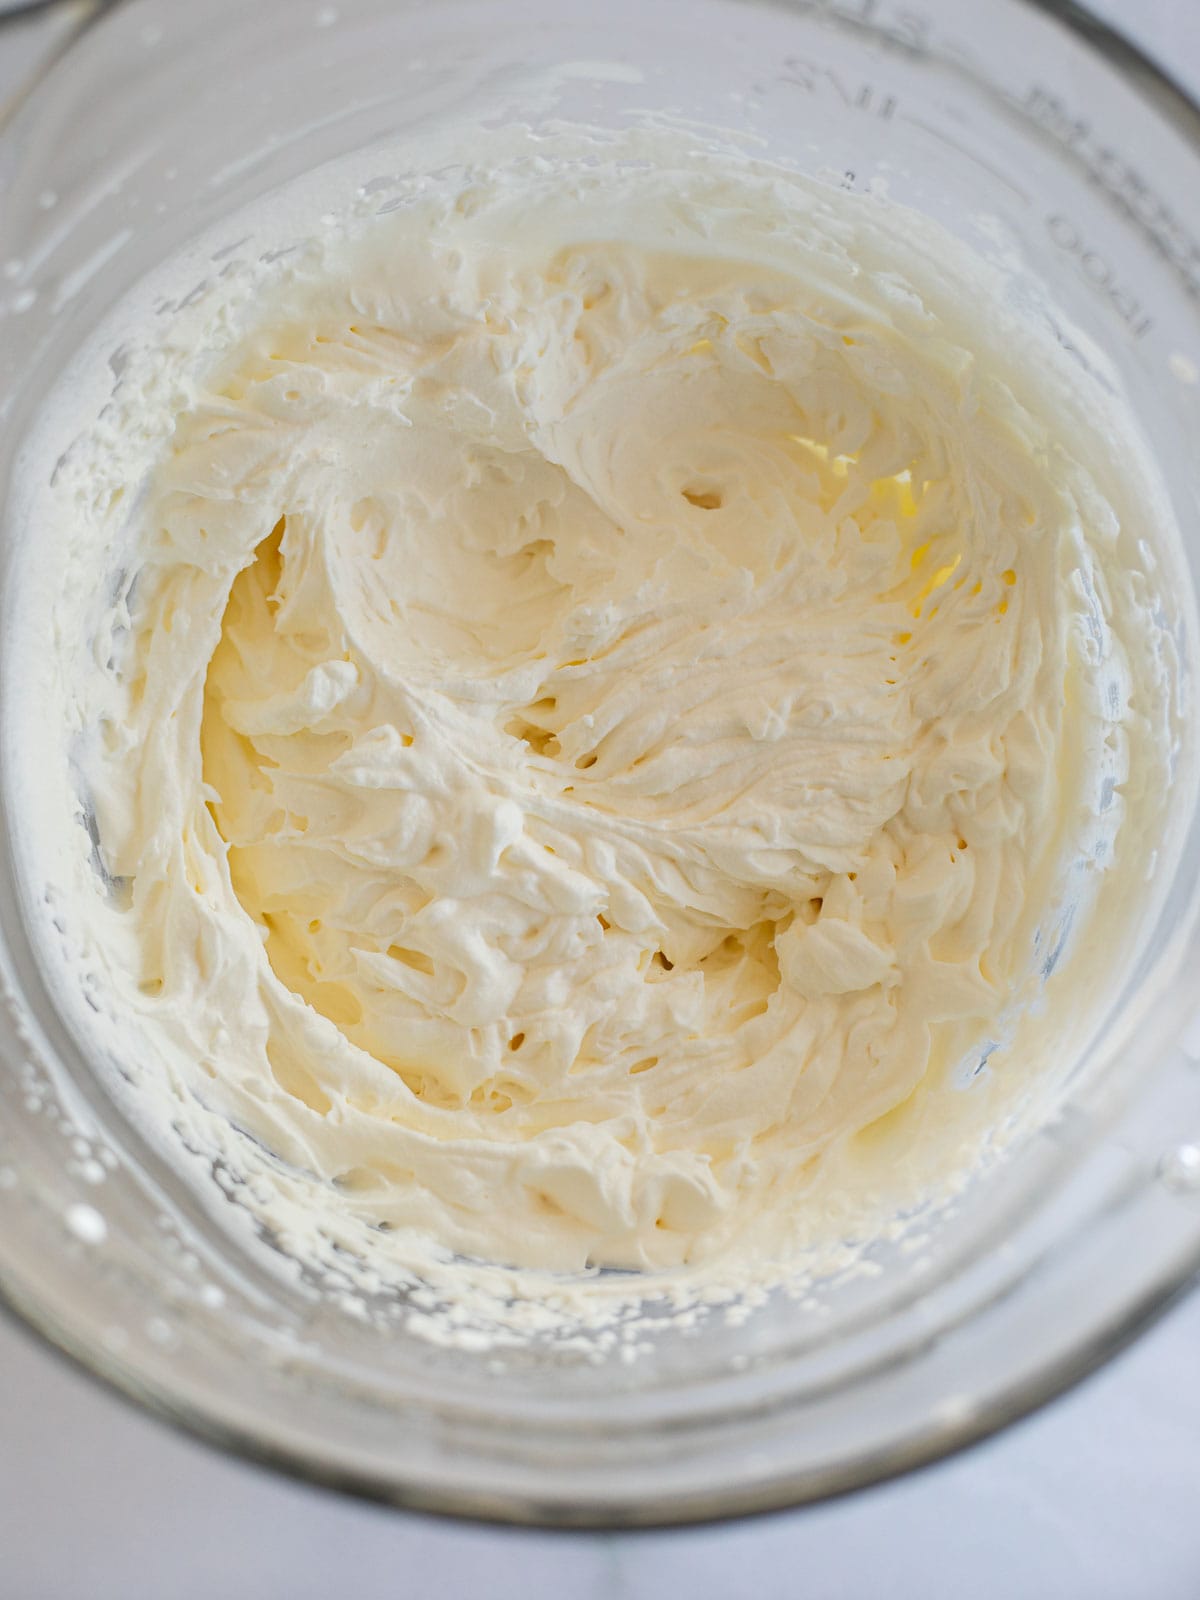 heavy cream whipped to stiff peaks in a glass bowl.